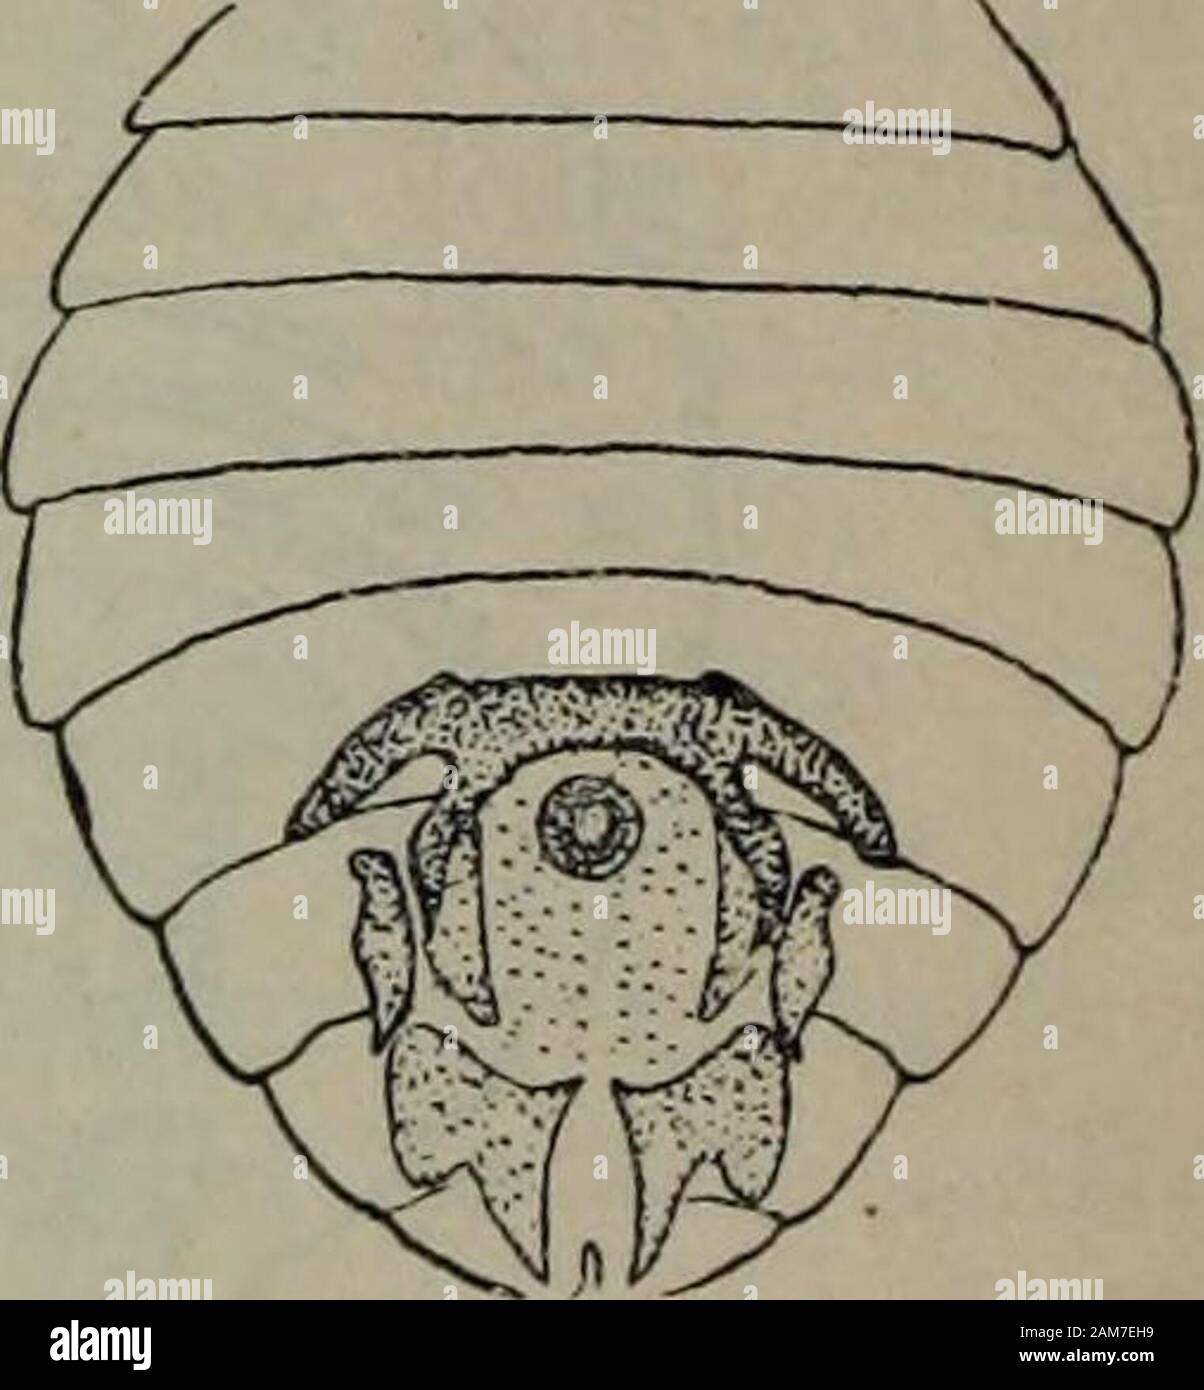 Transactions of the Royal Society of New Zealand . Fig. 11. Philopterus numeniicola. 0.. Fig. 12. Philopterus numeniicola.Ventral. Philopterus numeniicola n. sp. Two females from Numenius variegatus Scop. This speci°s bears astrong general resemblance to the last, but is smaller, the head is longer Johnston and Harrison.—Mallophaga from the Kermadecs. 373 and narrower, the prothorax different in shape, and there are other minordifferences. Description of Female.—Head longer than broad, with elongate con-cave-sided clypeus, evenly rounded temporal lobes, and slightly concavehind margin, with ve Stock Photo